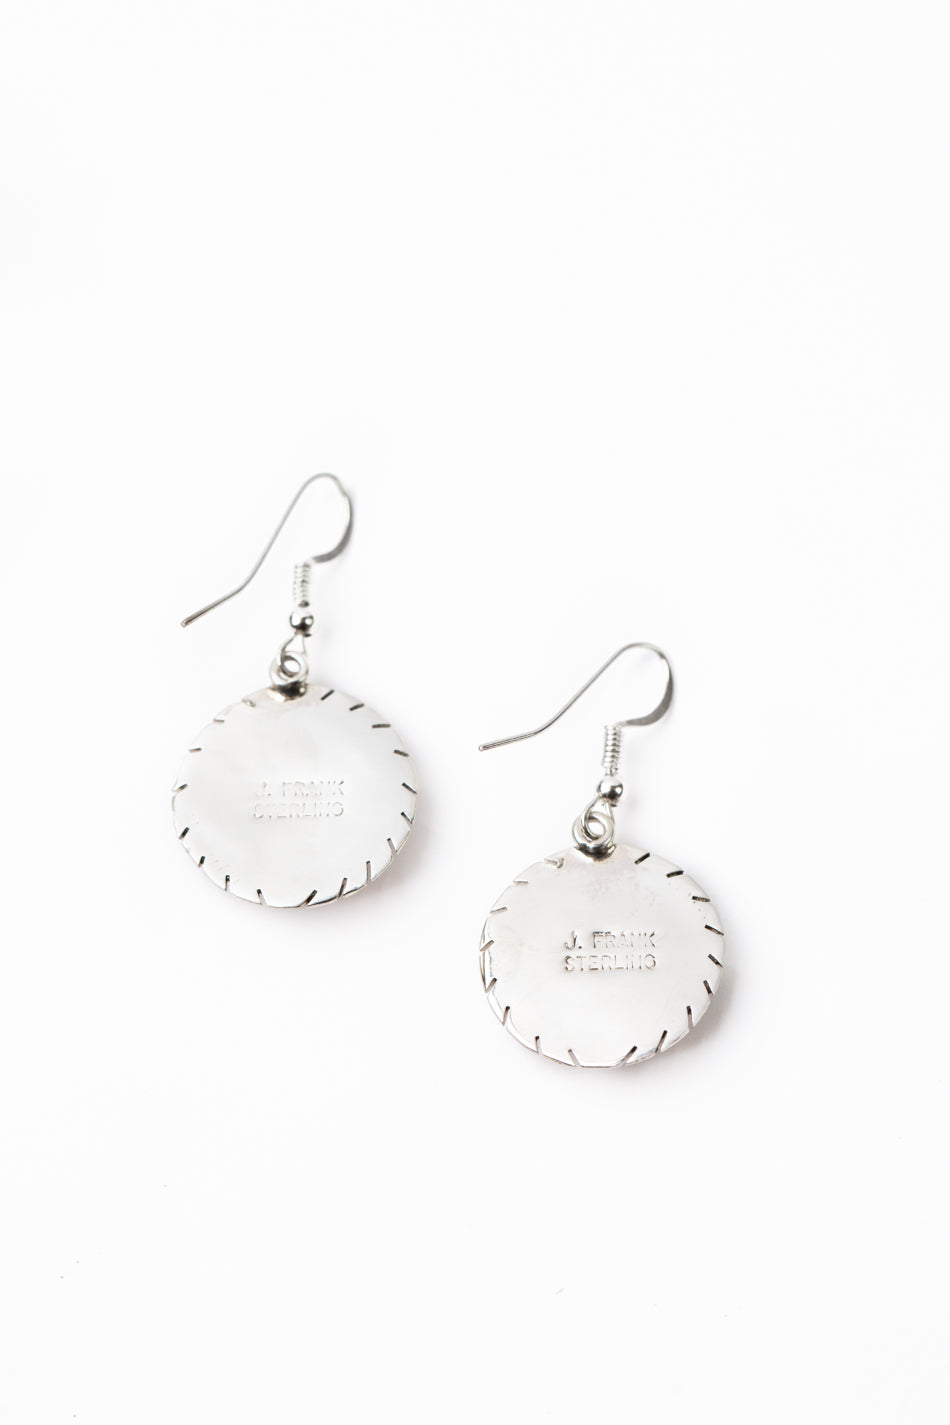 J. Frank Spiny Oyster Simple Earrings